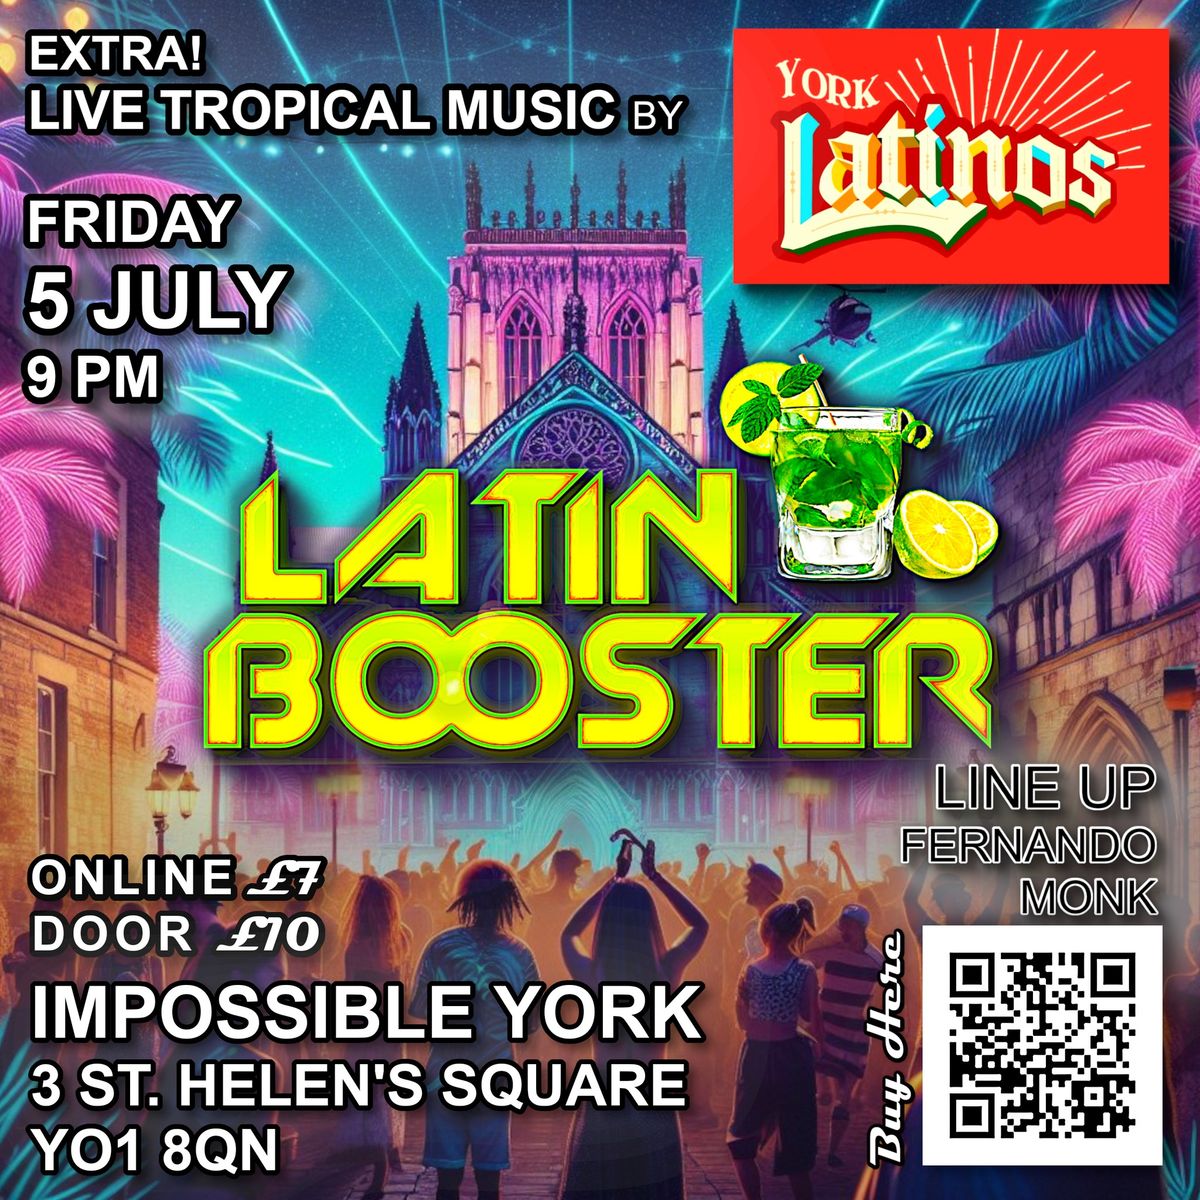 Latin Booster Party + Live Musica by York Latinos Band | Impossible York